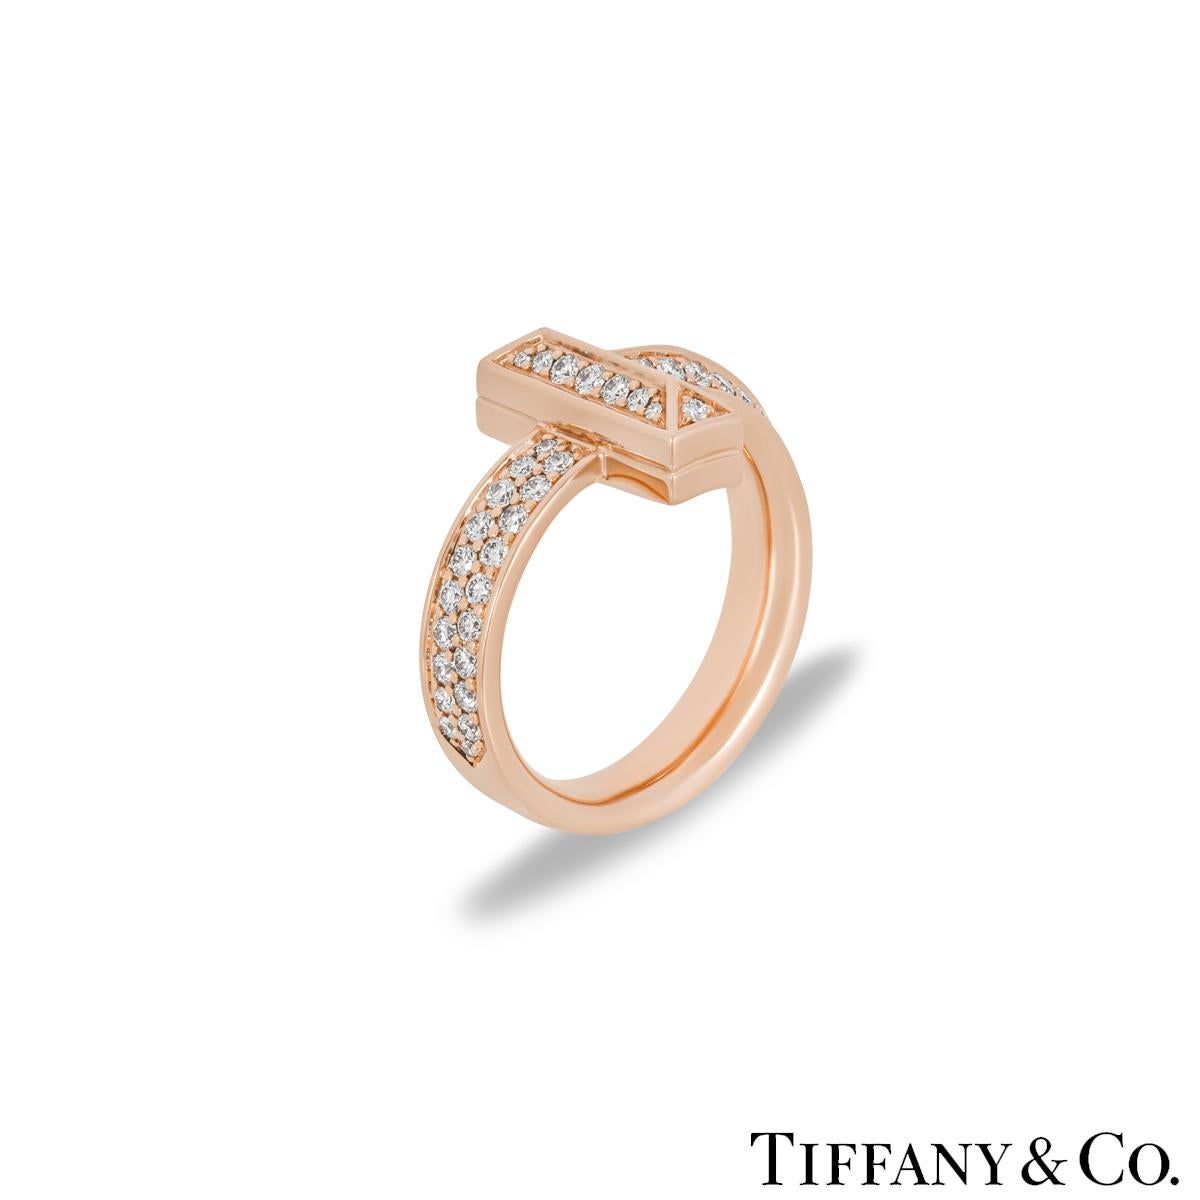 An extravagant 18k rose gold diamond ring by Tiffany & Co. from the Tiffany T collection. The diamond set T1 ring wraps around the finger with the iconic Tiffany T motif at the centre. The 61 round brilliant cut diamonds are pave set throughout with